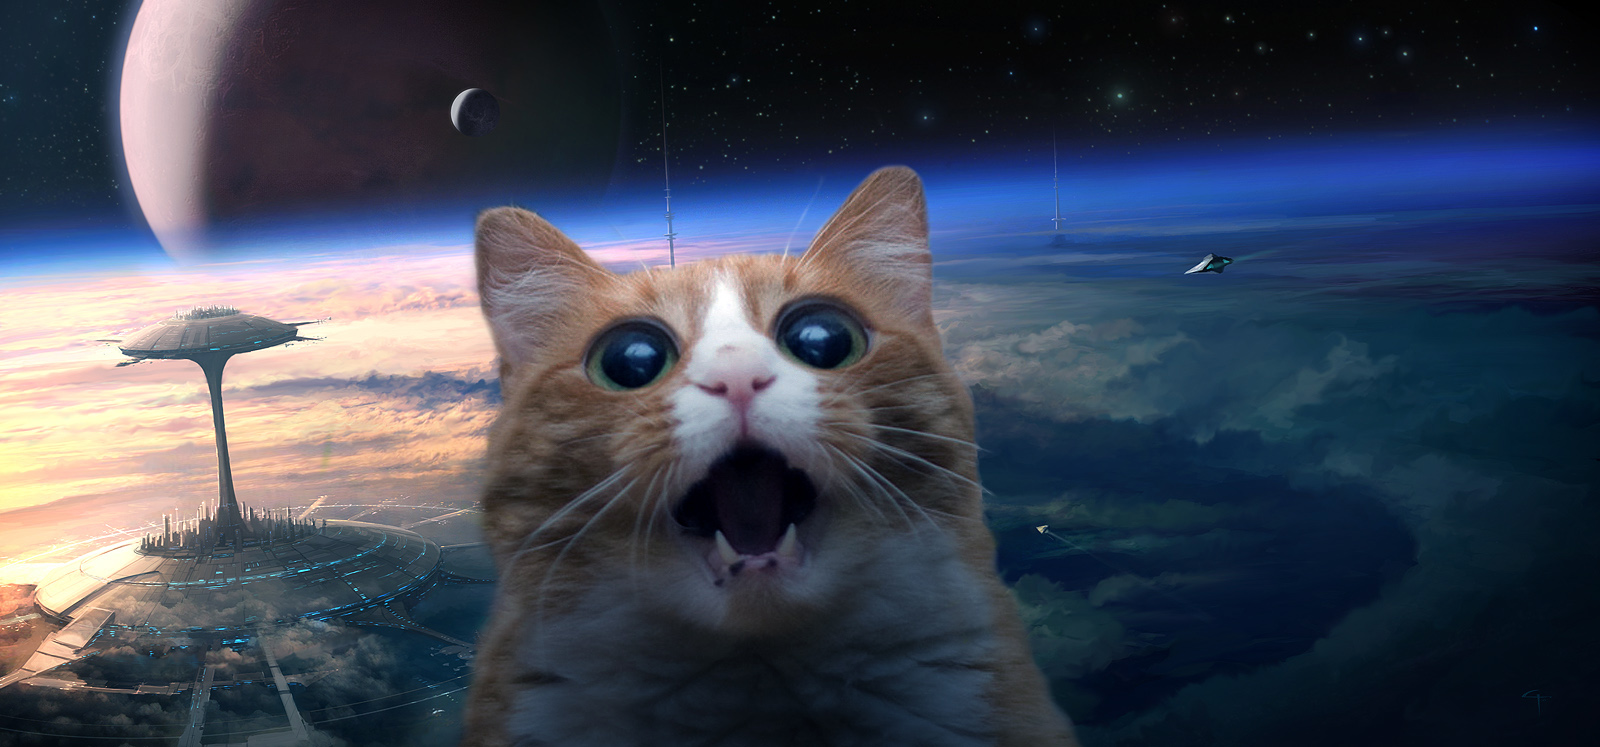 space cat wallpaper,cat,whiskers,sky,felidae,small to medium sized cats